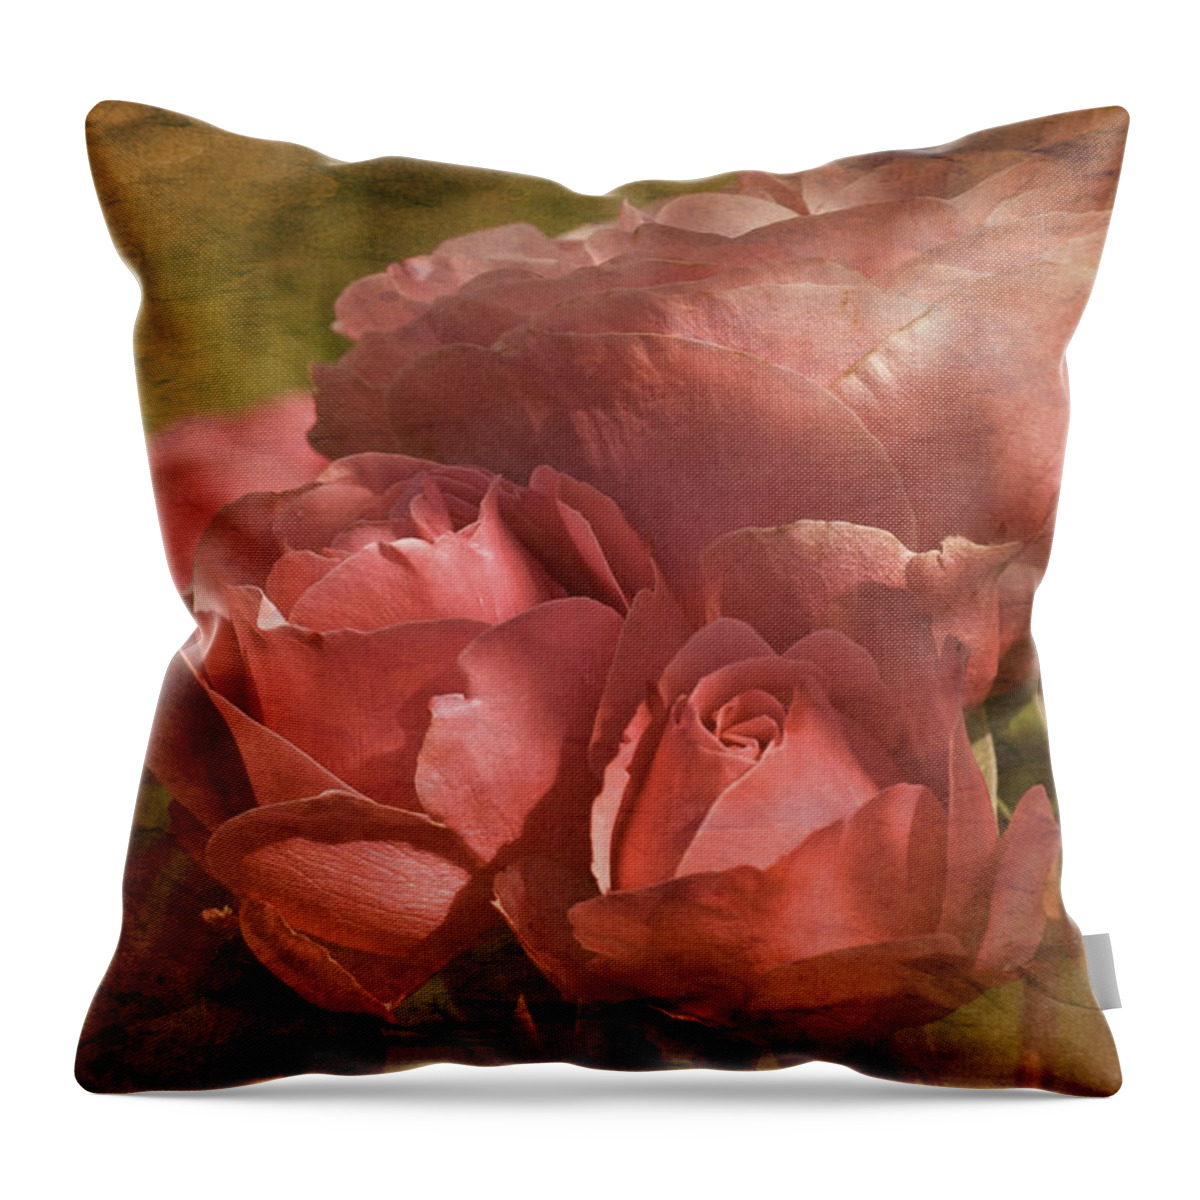 Red Roses Throw Pillow featuring the photograph Vintage Sunday Roses June 14th by Richard Cummings